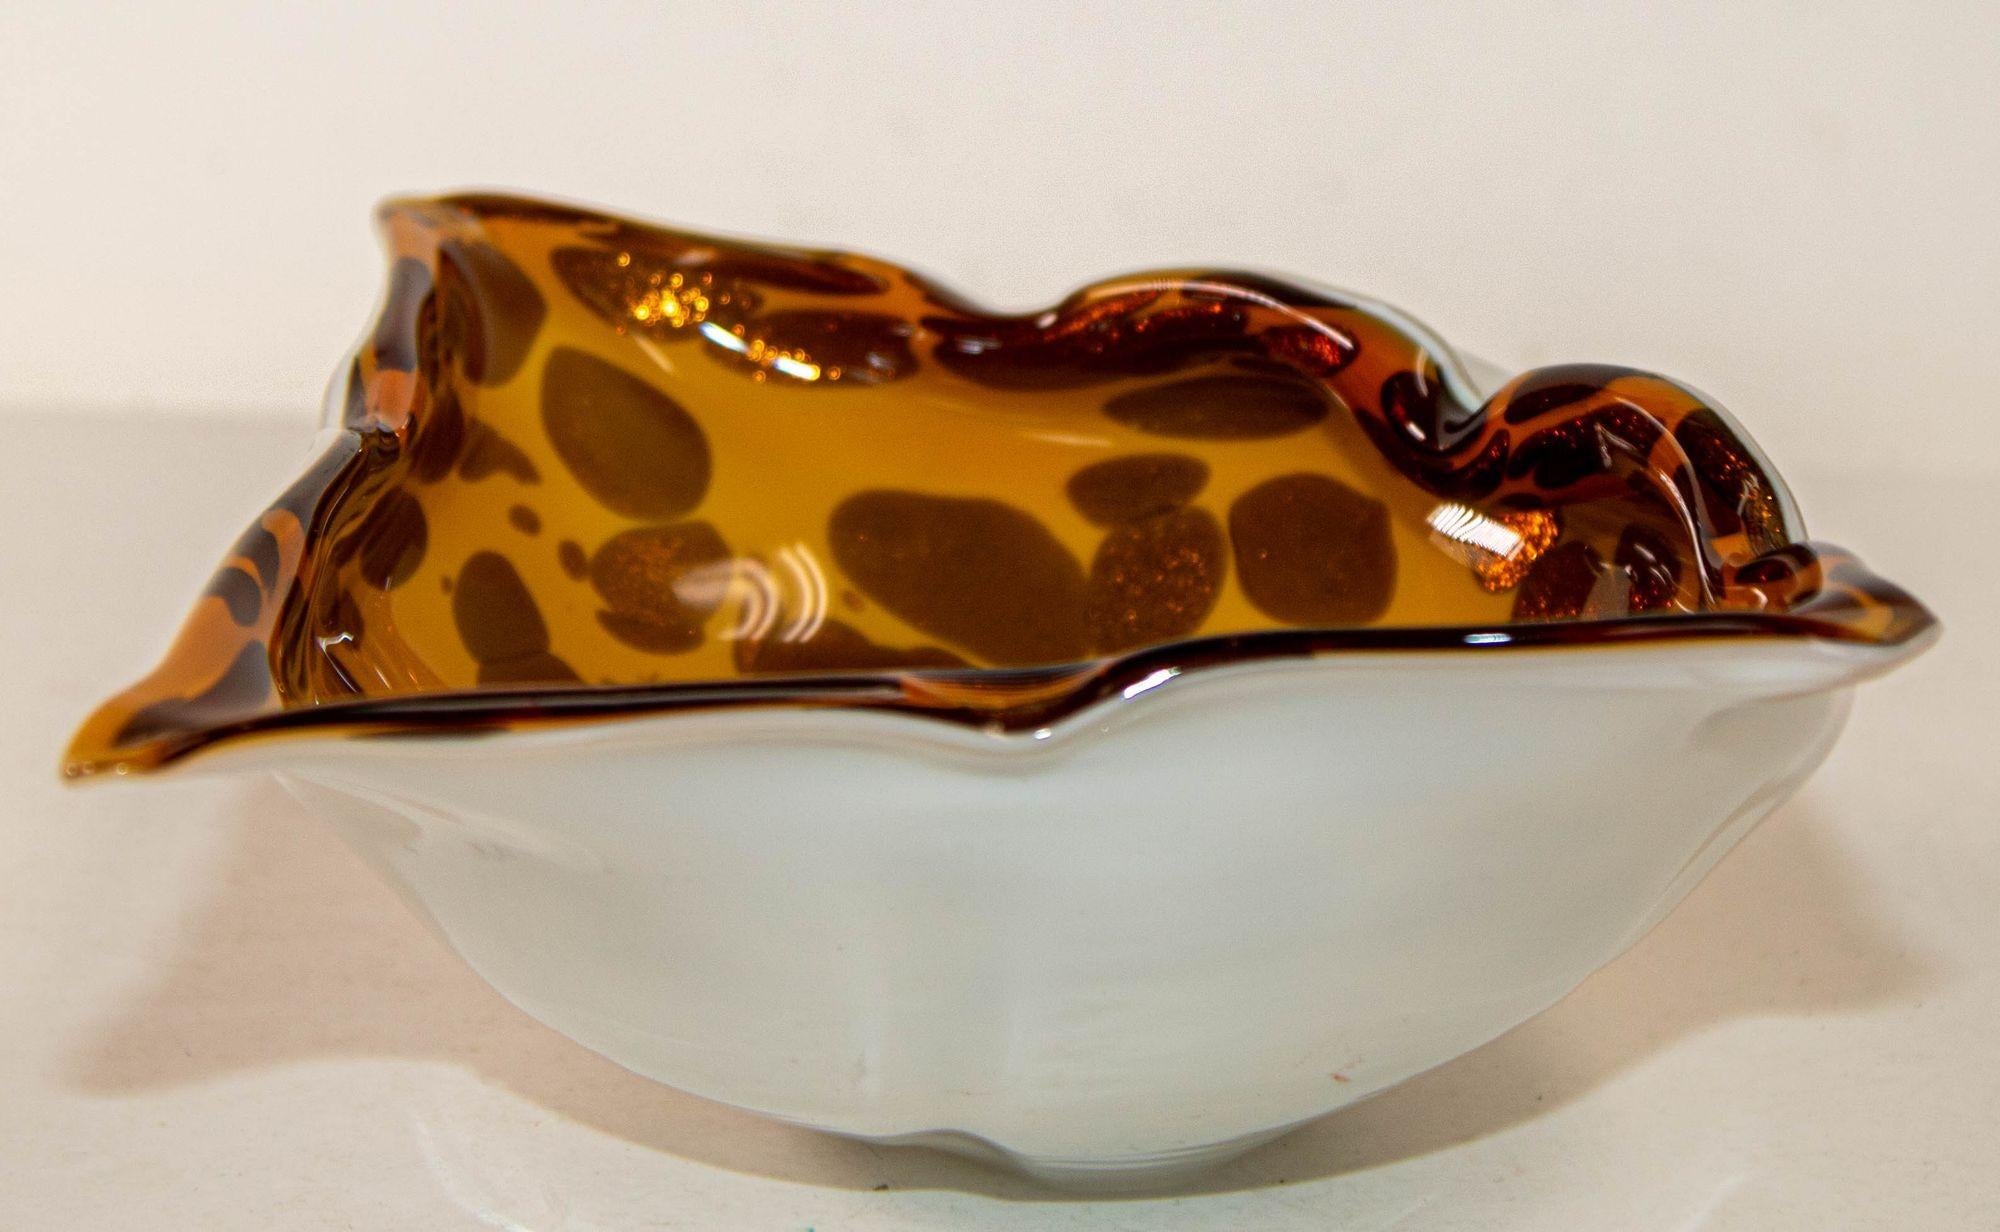 Murano Art Glass Manta Ray Tortoise Spotted Bowl Ashtray Vintage 1960s For Sale 7